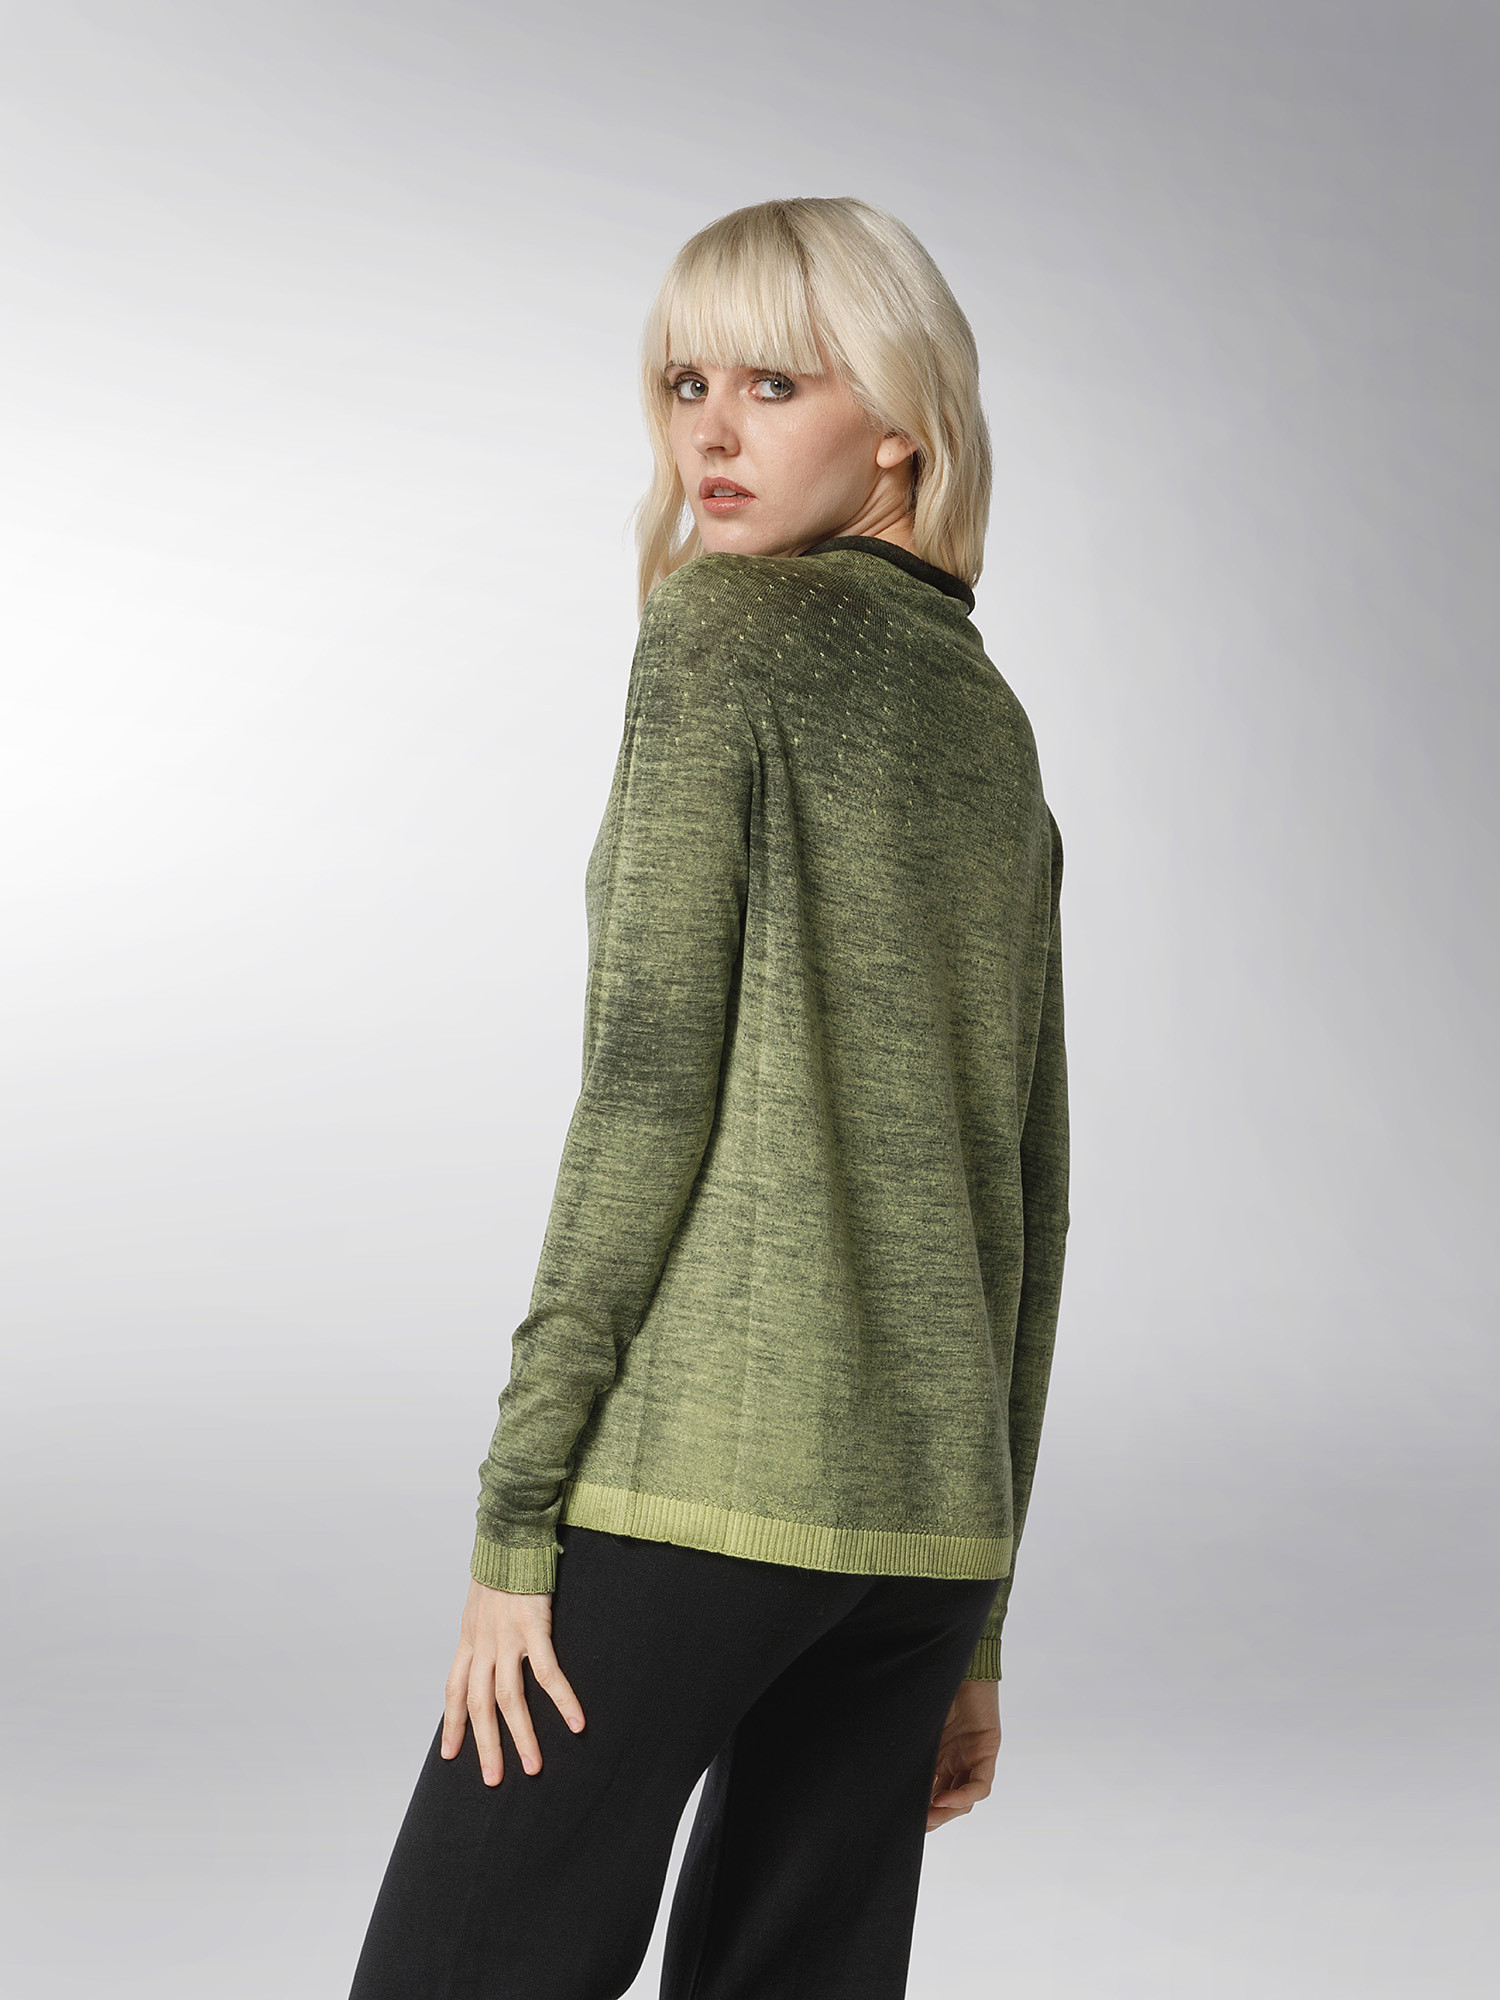 K Collection - Extra fine wool sweater, Green, large image number 4